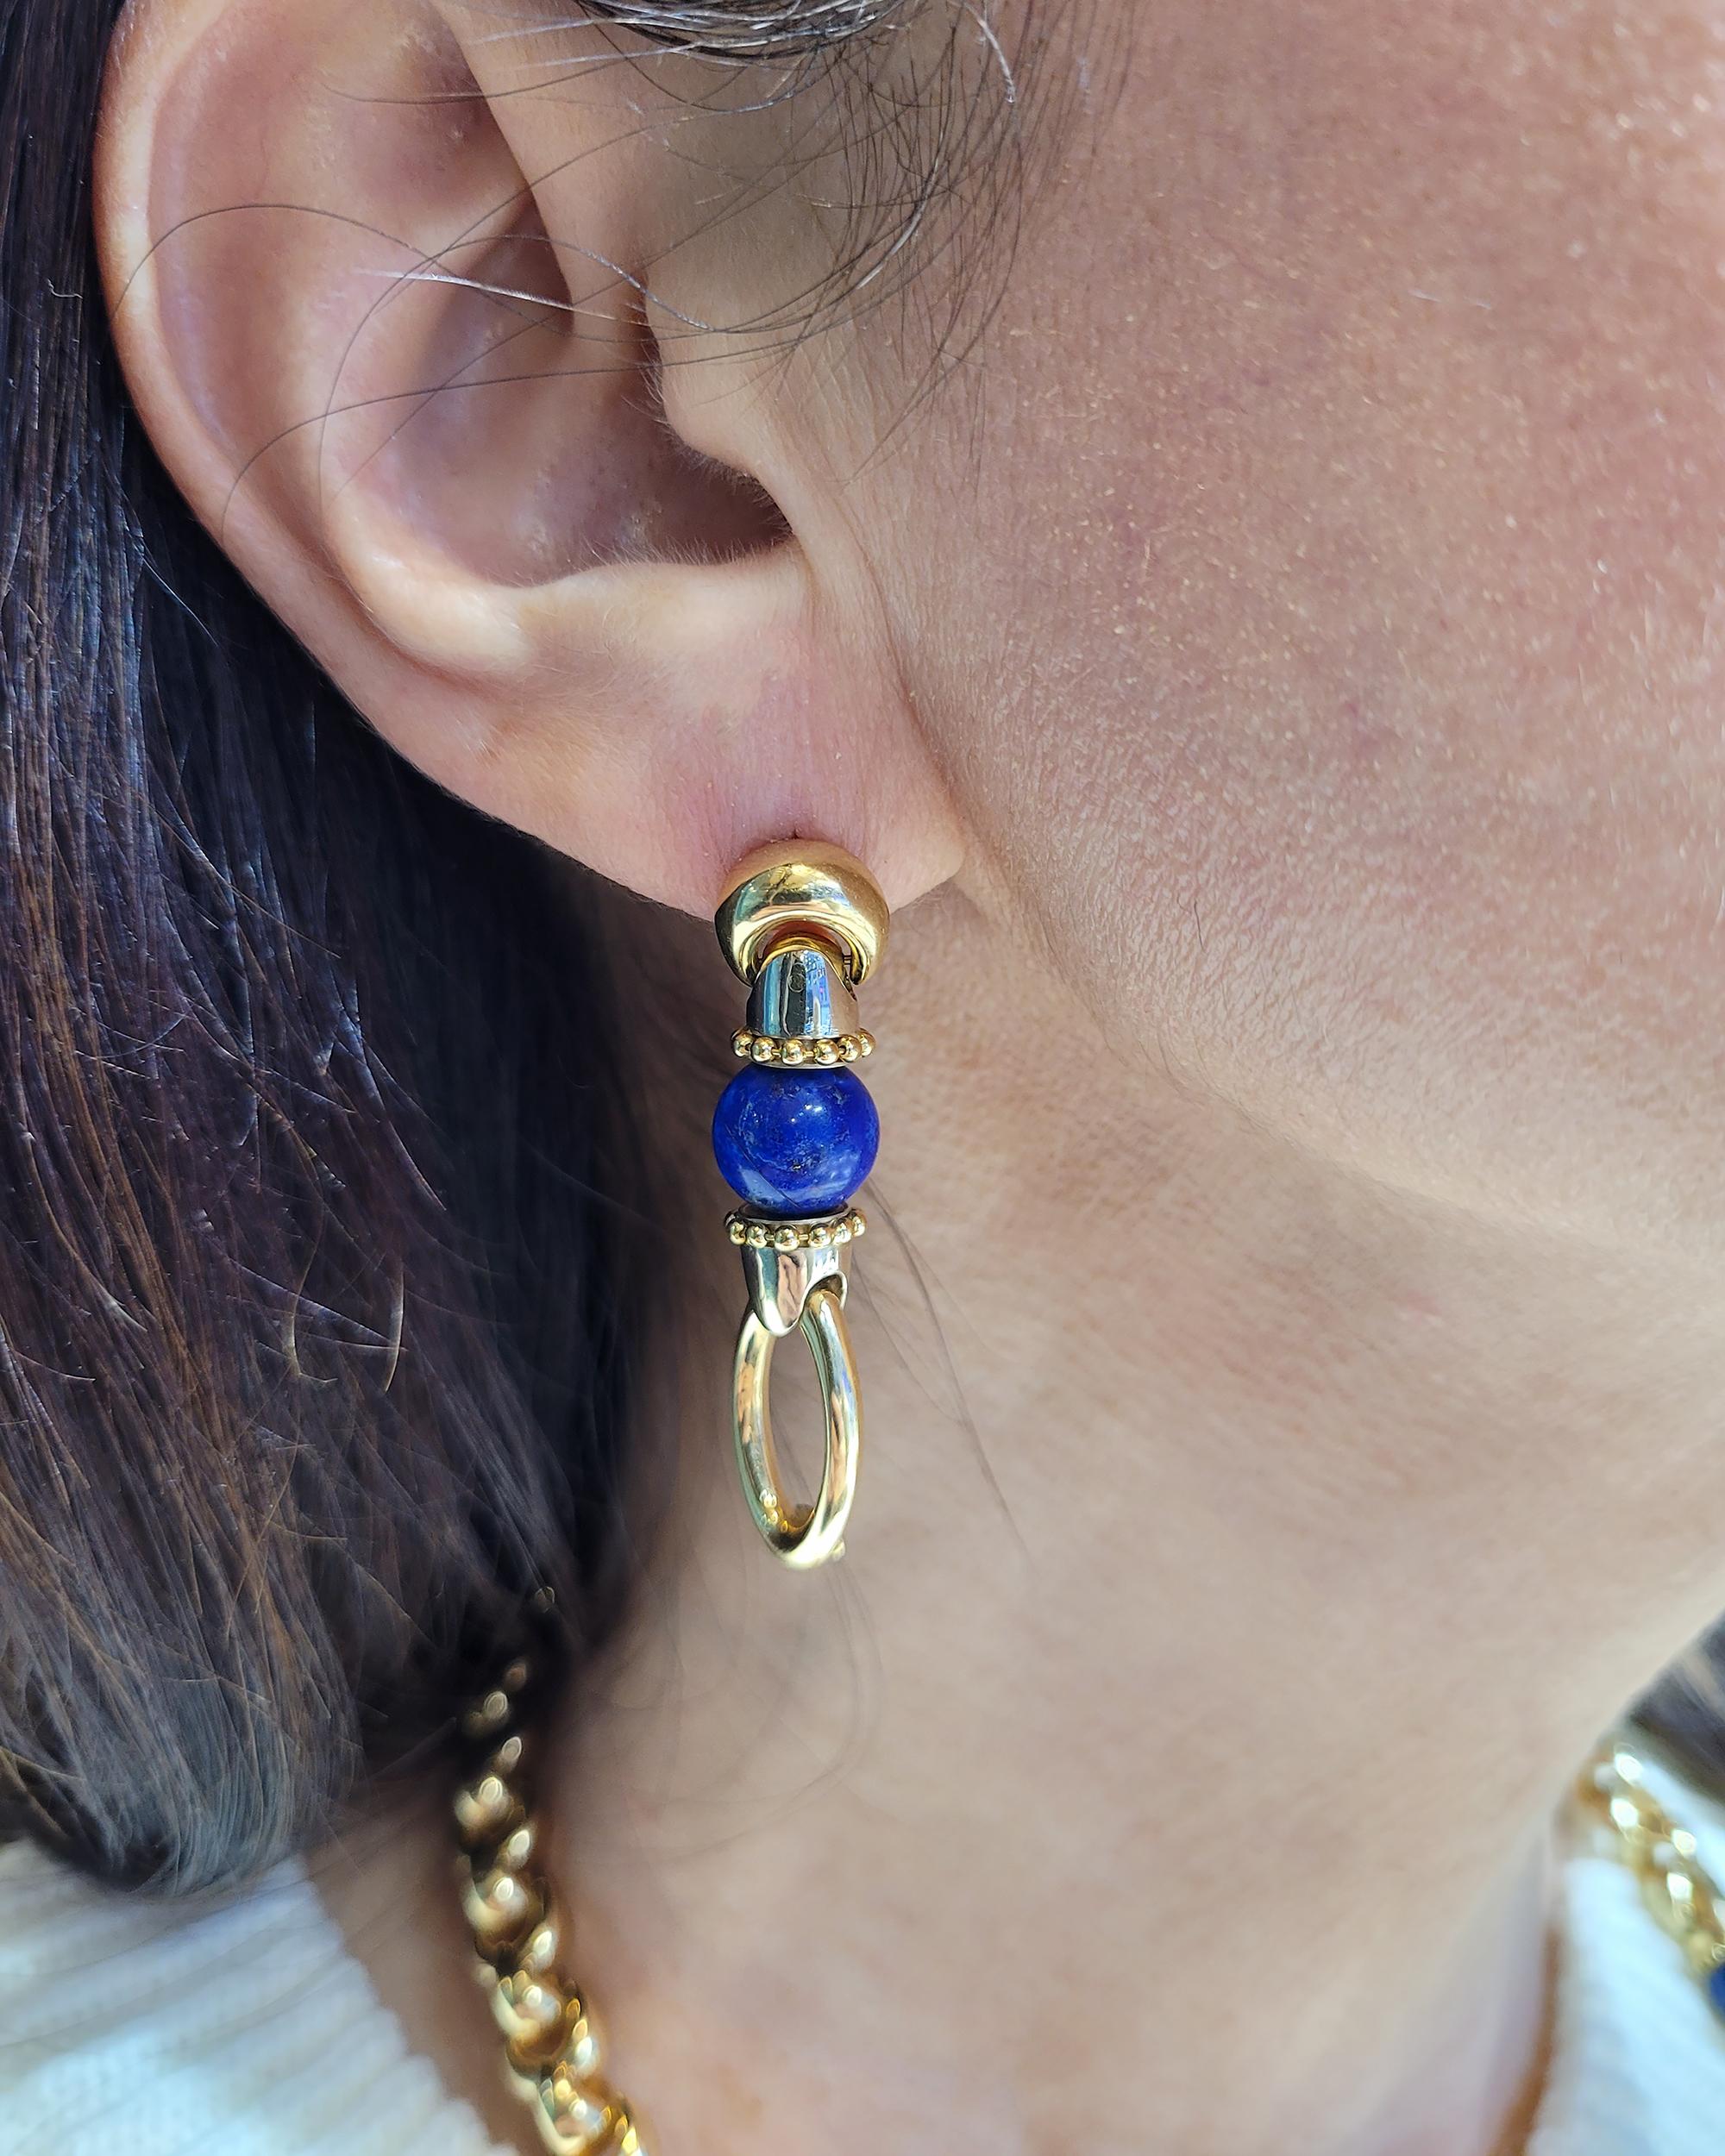 Lapis Lazuli Necklace Earrings Bracelet Jewelry Set in 18k Yellow Gold In Excellent Condition For Sale In New York, NY